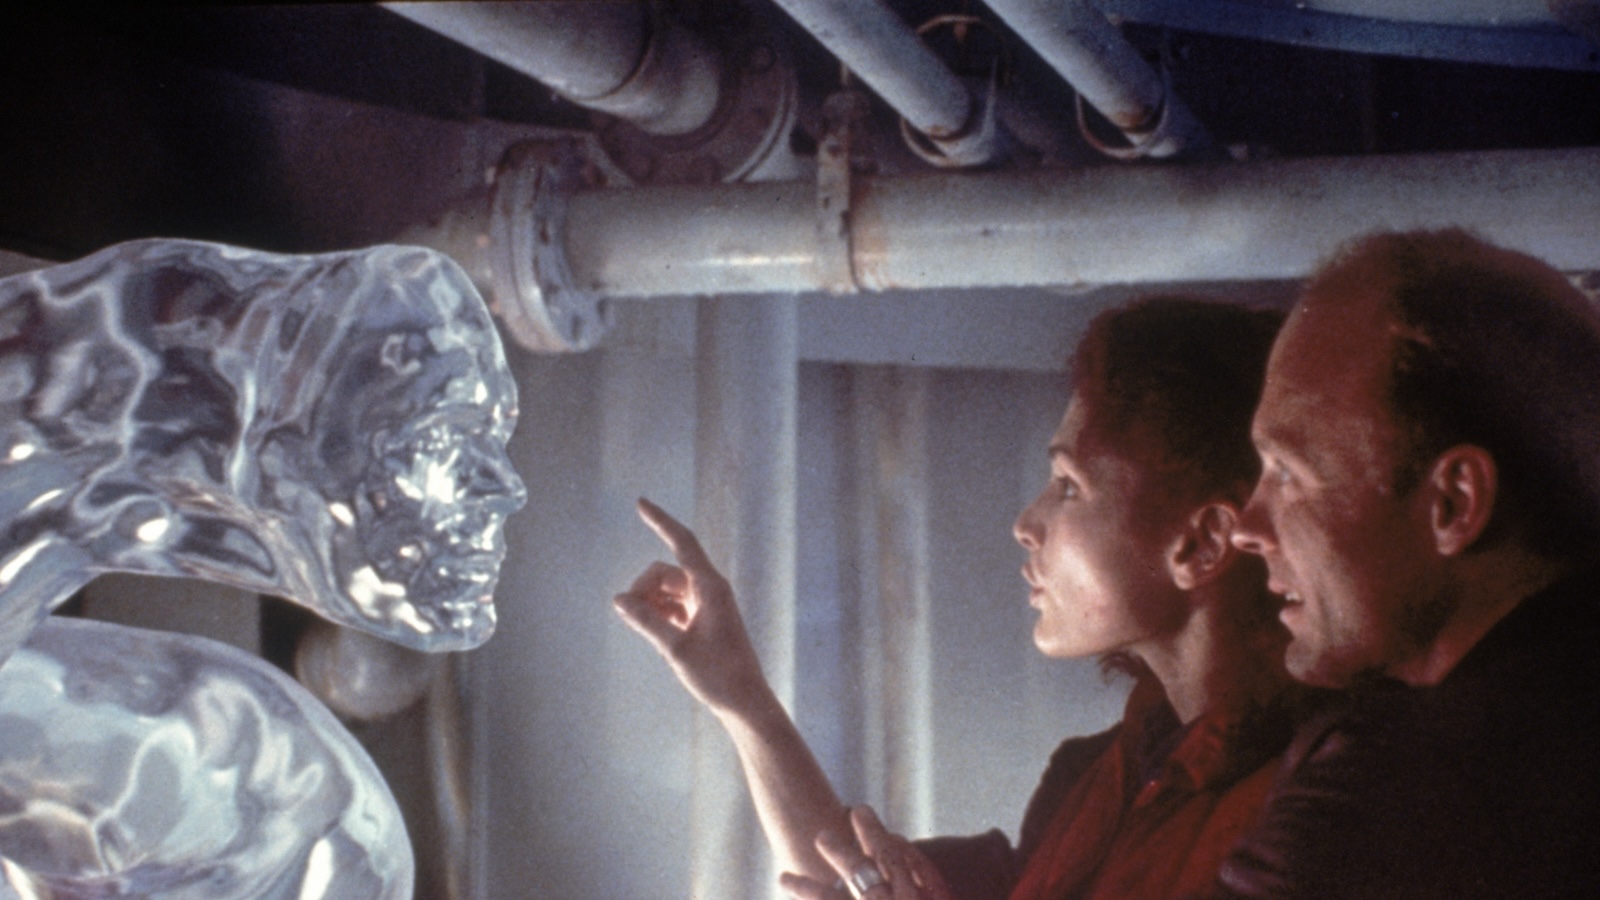 Two people stand in front of a creature with a human face made of water, one pointing her finger at it